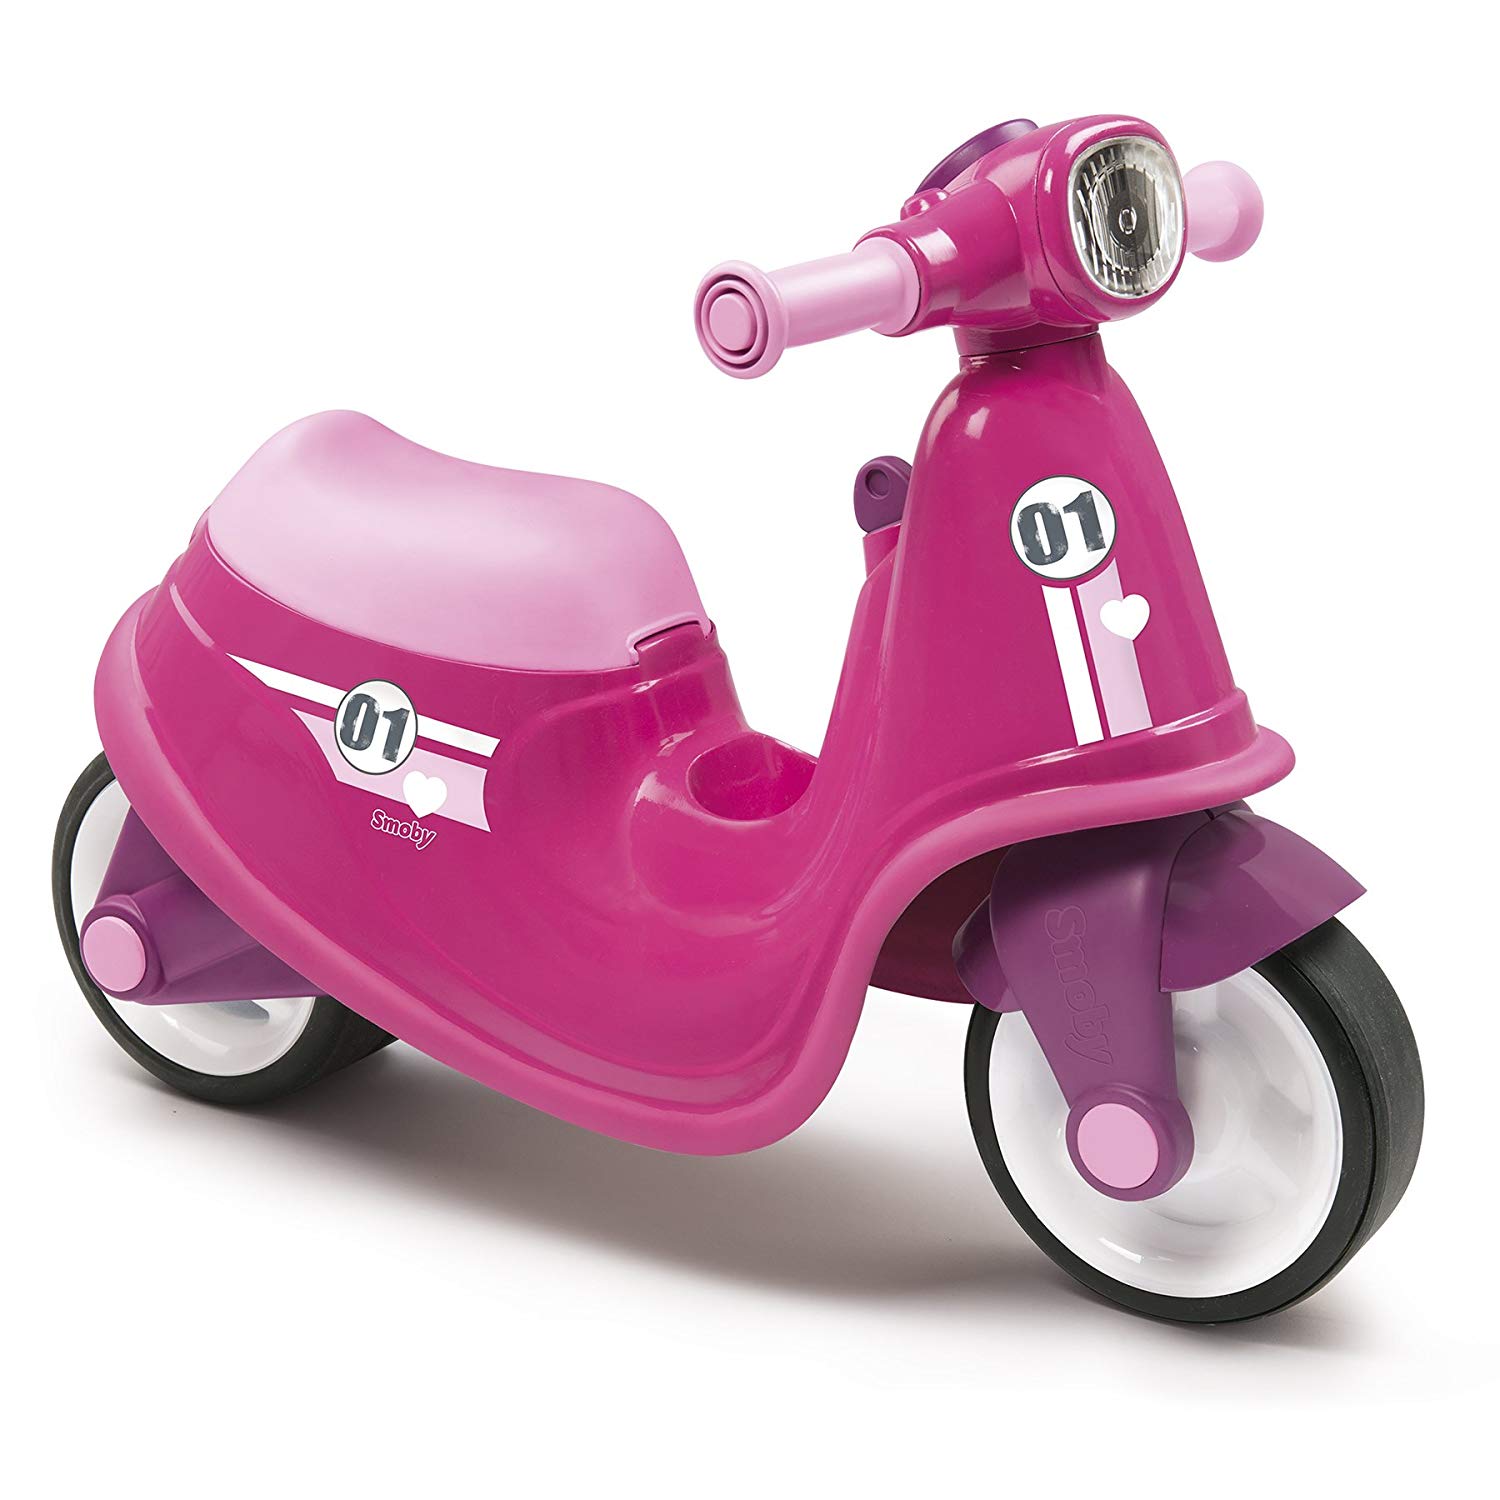 Smoby – Non Auto Scooter Pink – 721002